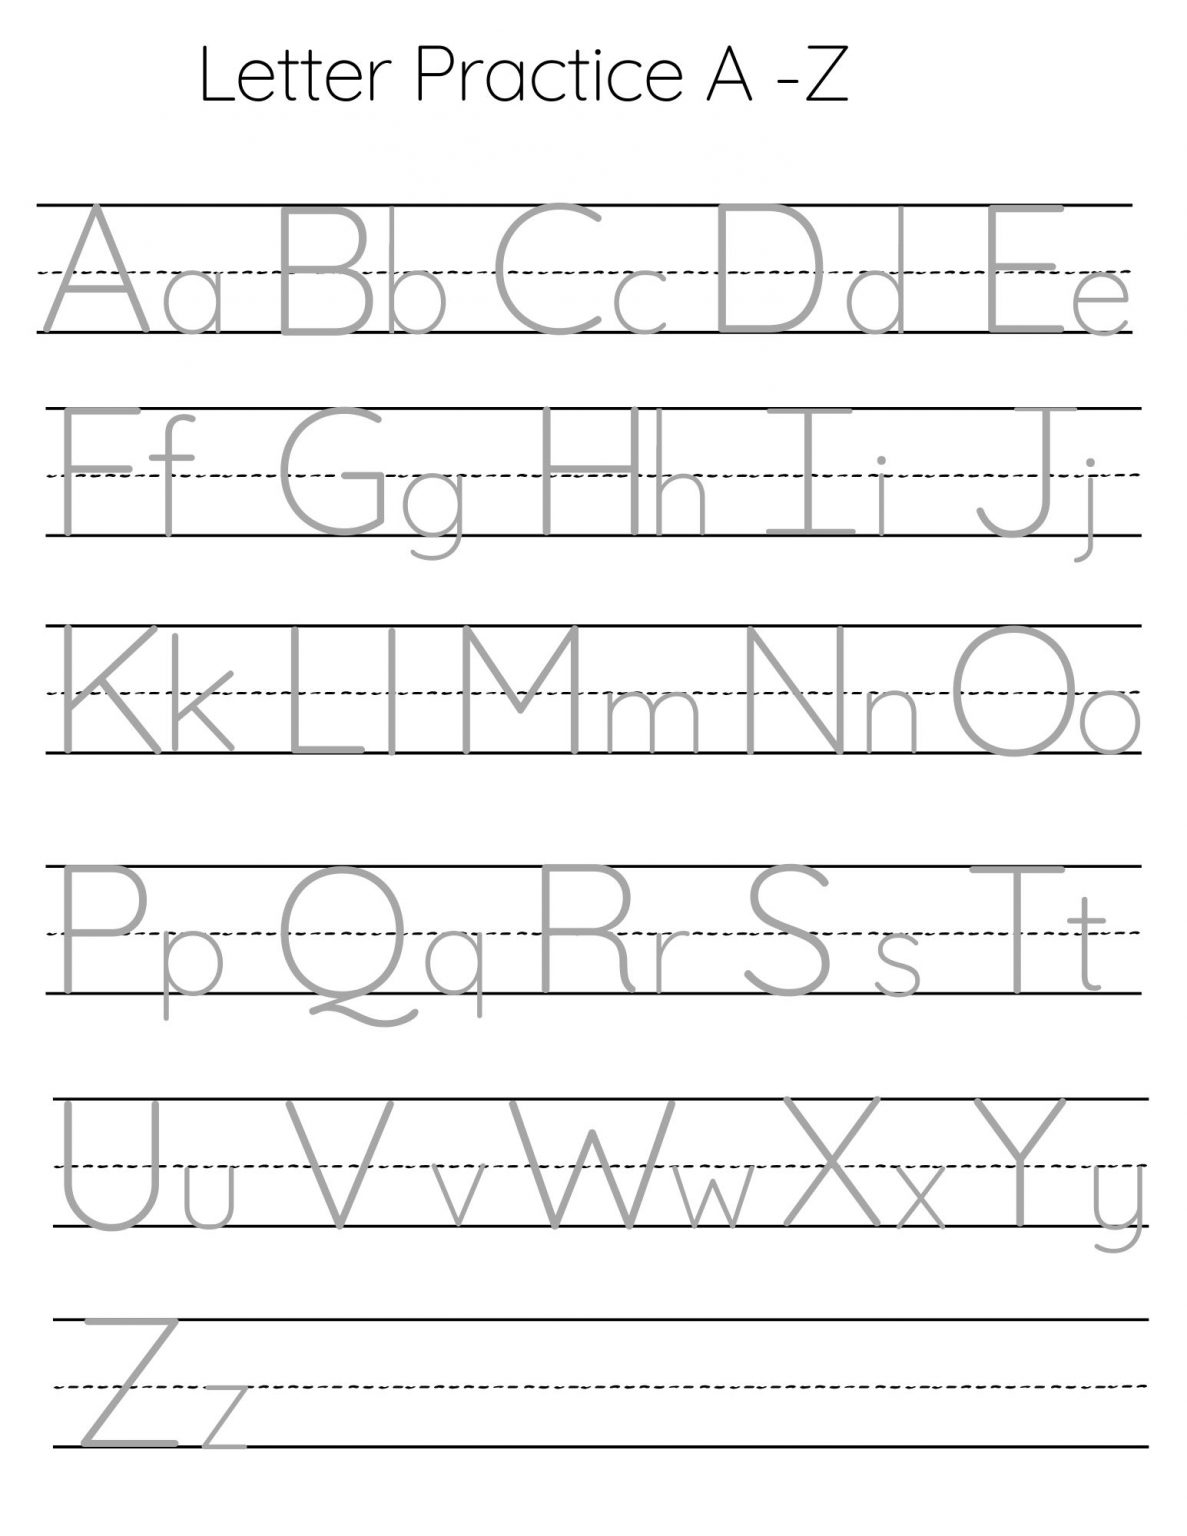 Alphabet Tracing Worksheets, Games & Activities for Young Letter Learners!